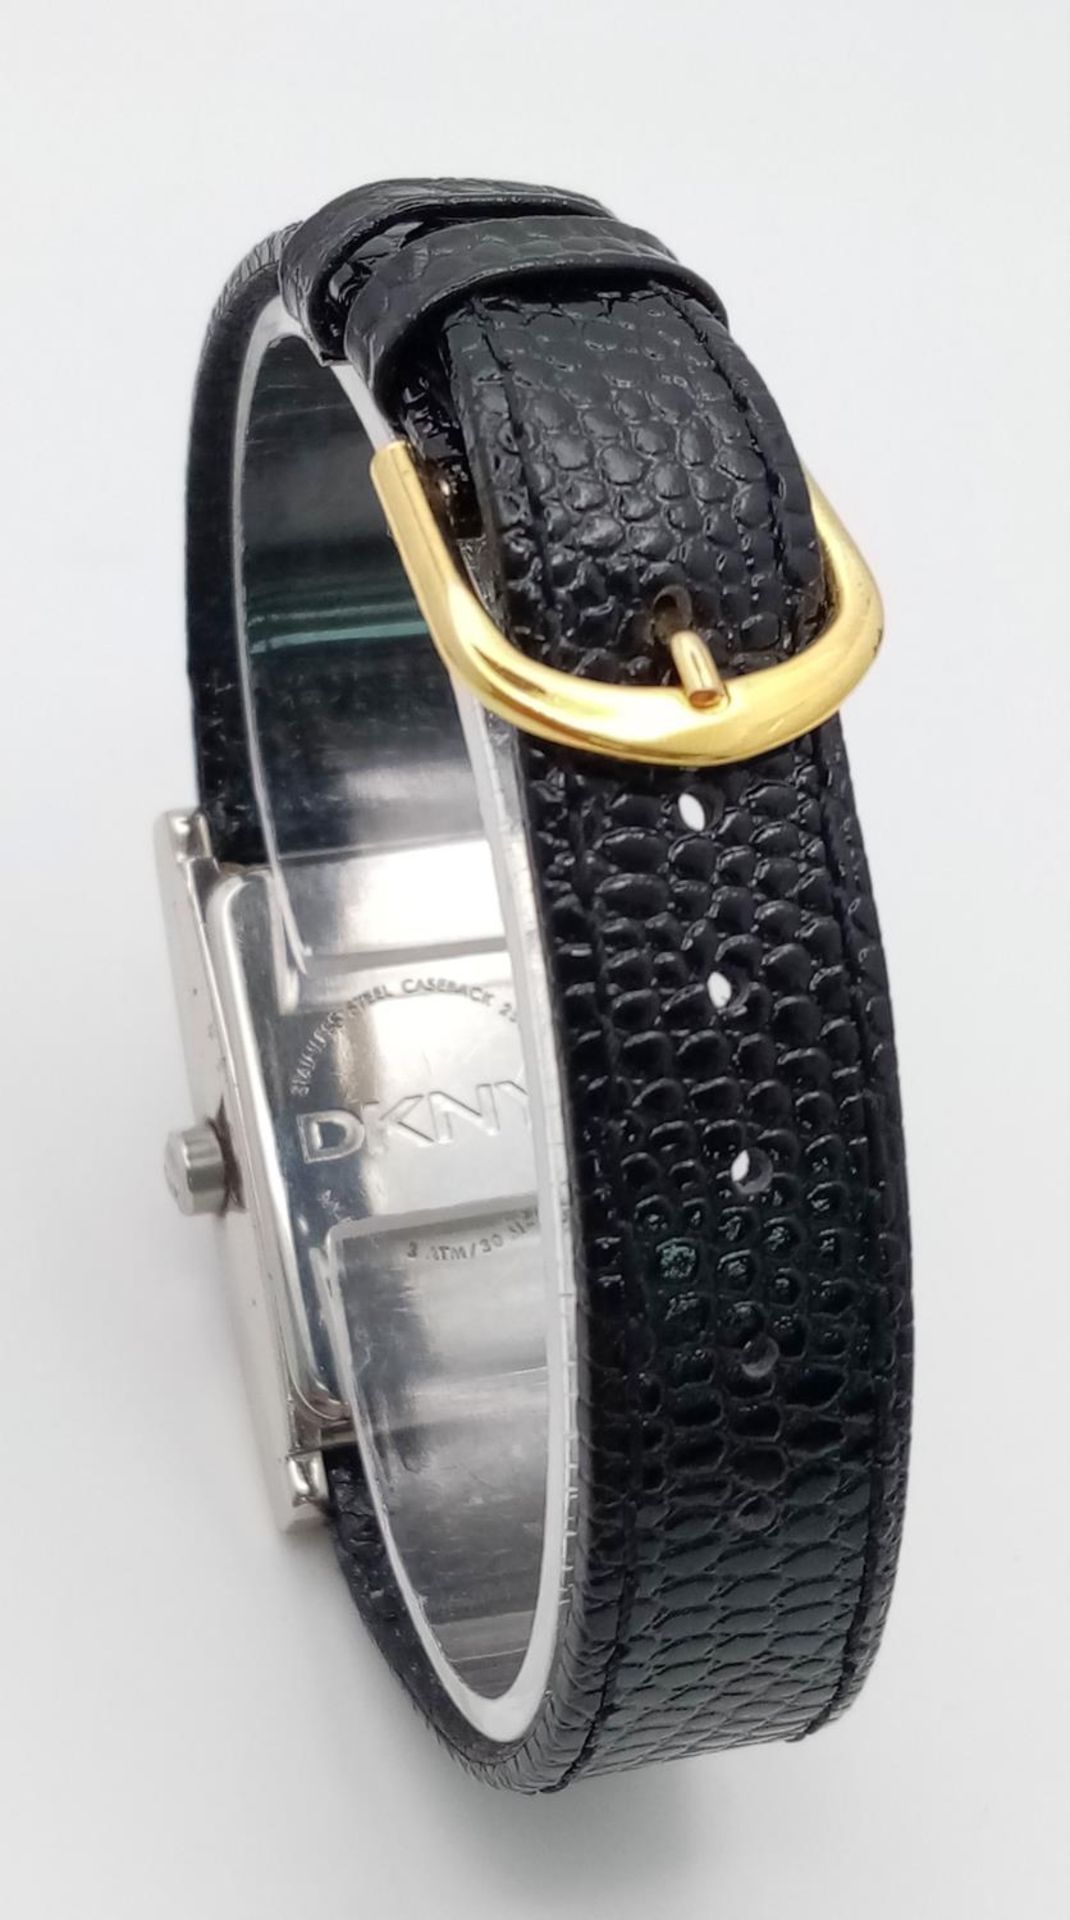 A DKNY Quartz Ladies Watch. Black leather strap. Stainless steel case - 24mm. Analogue/digital dial. - Image 6 of 6